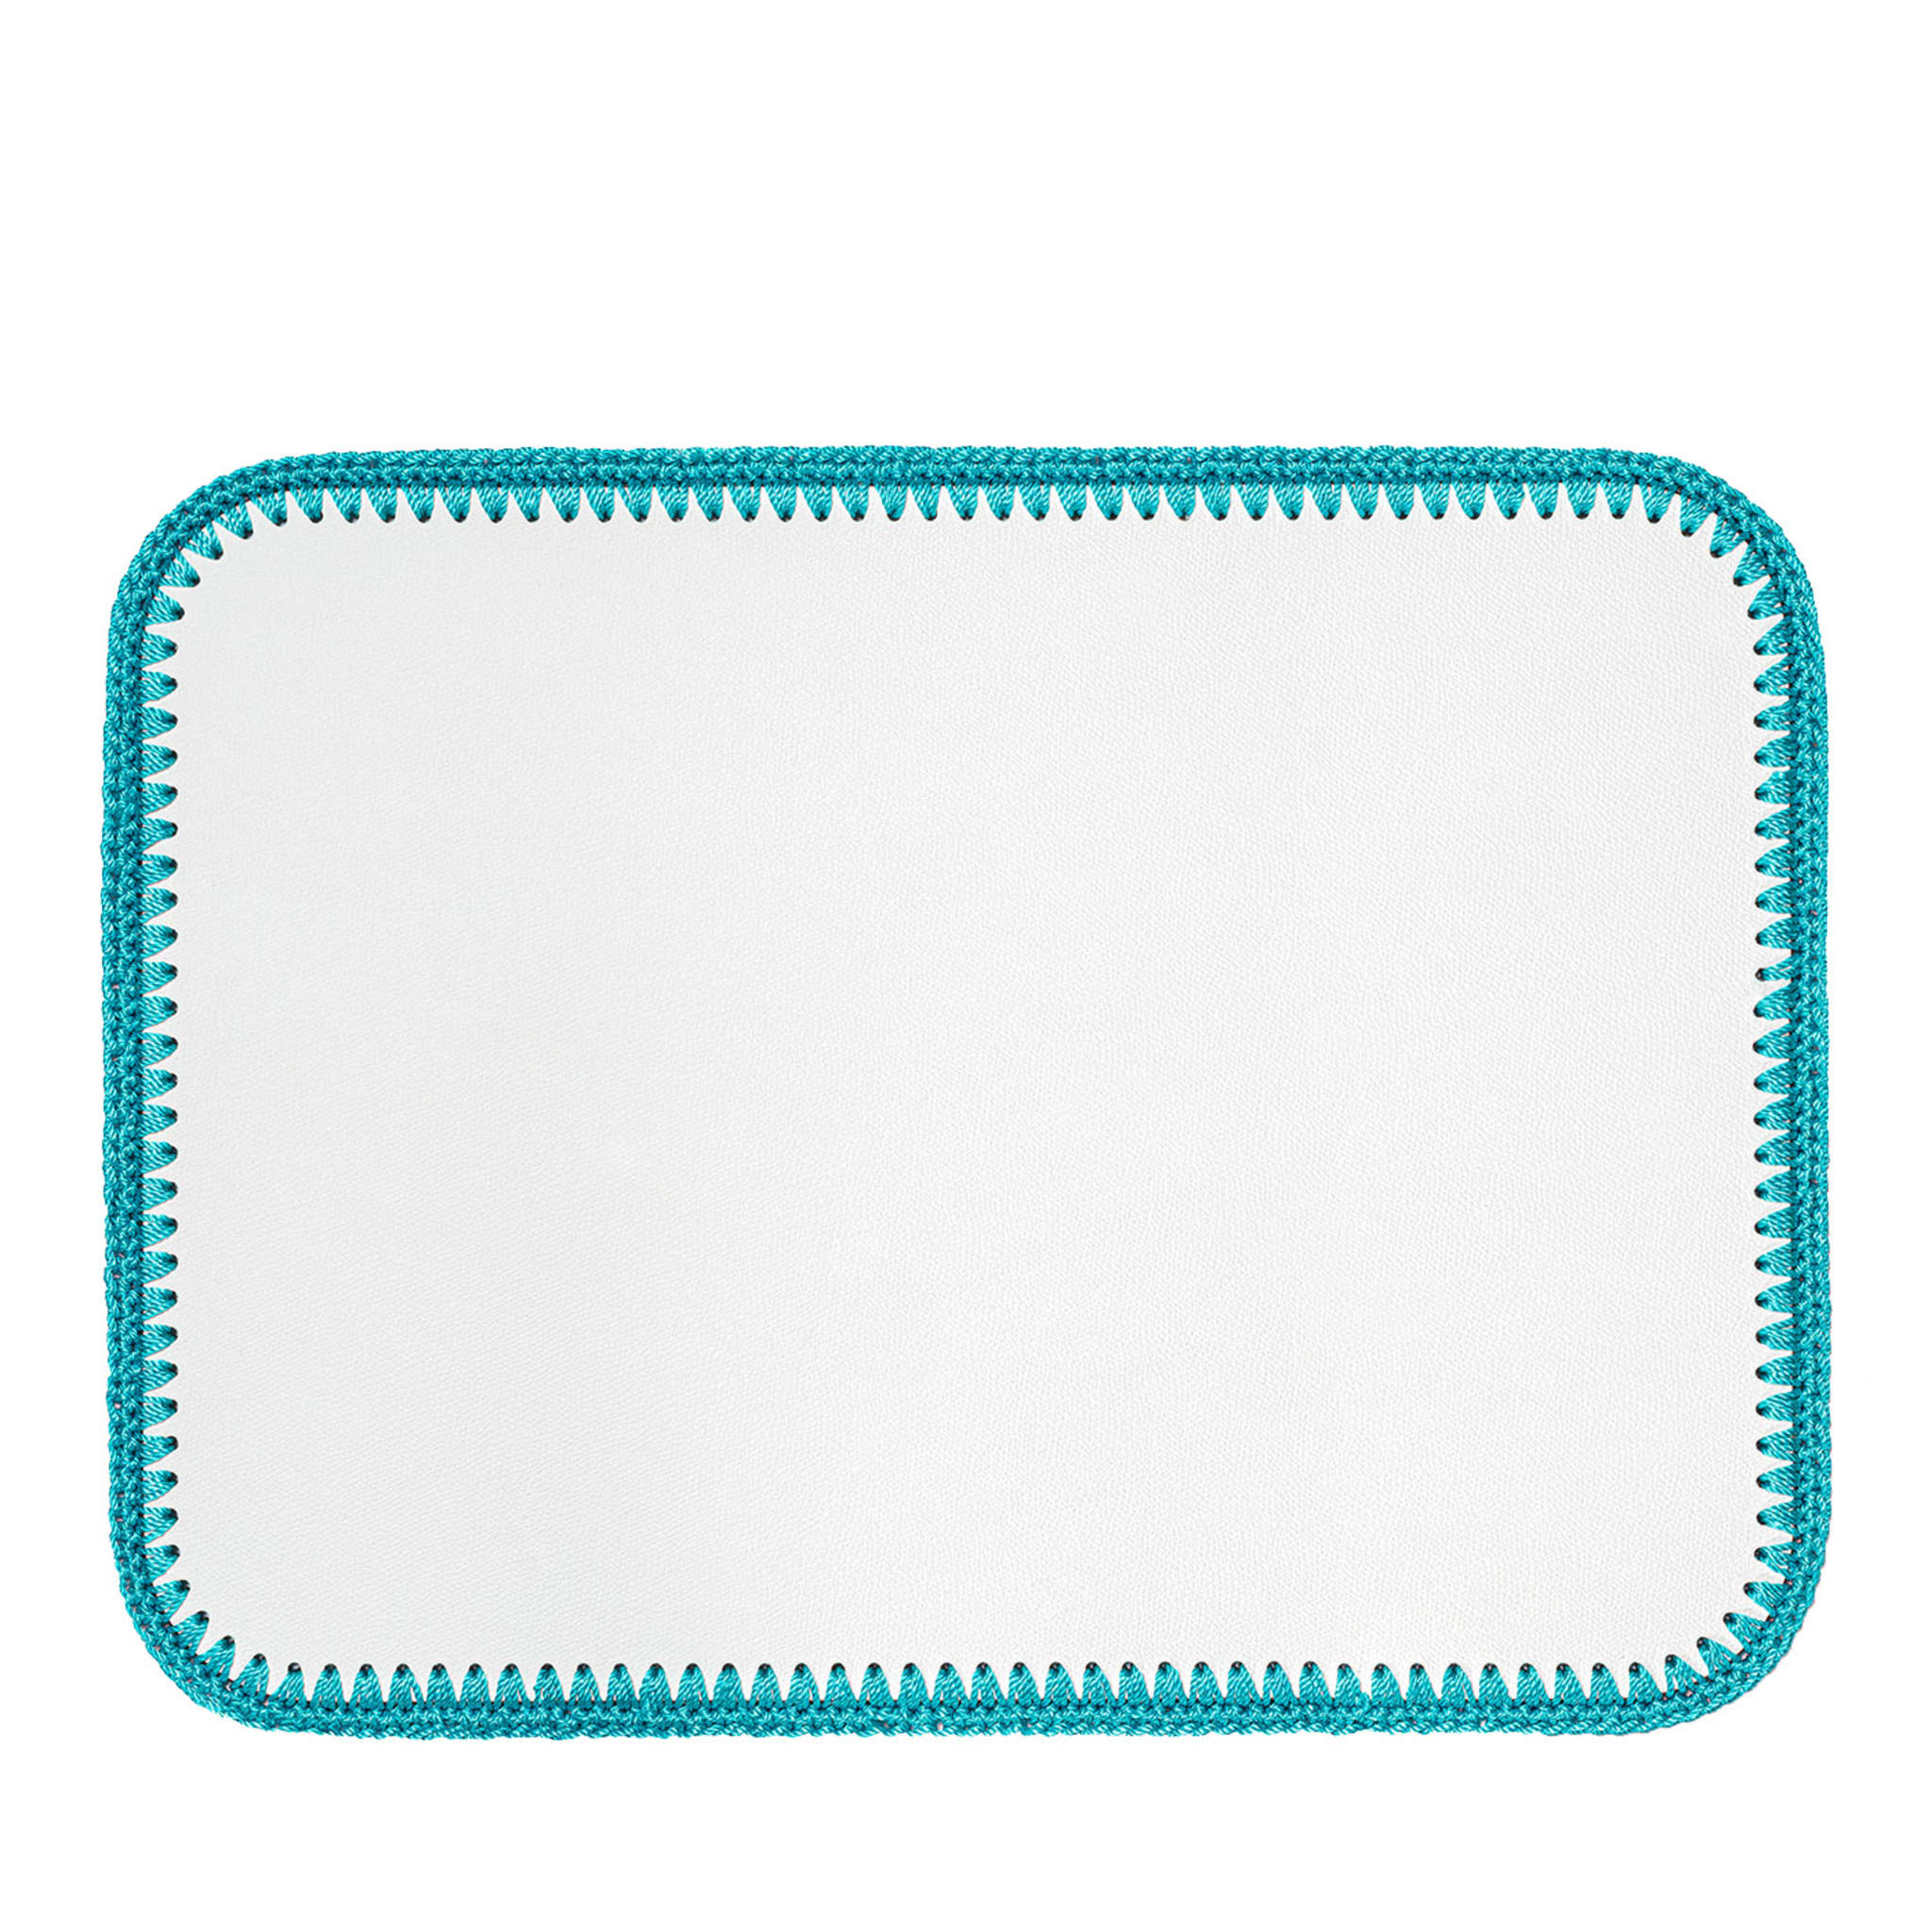 Rochelle Leather & Crochet Placemats Rectangular - Turquoise - Main view